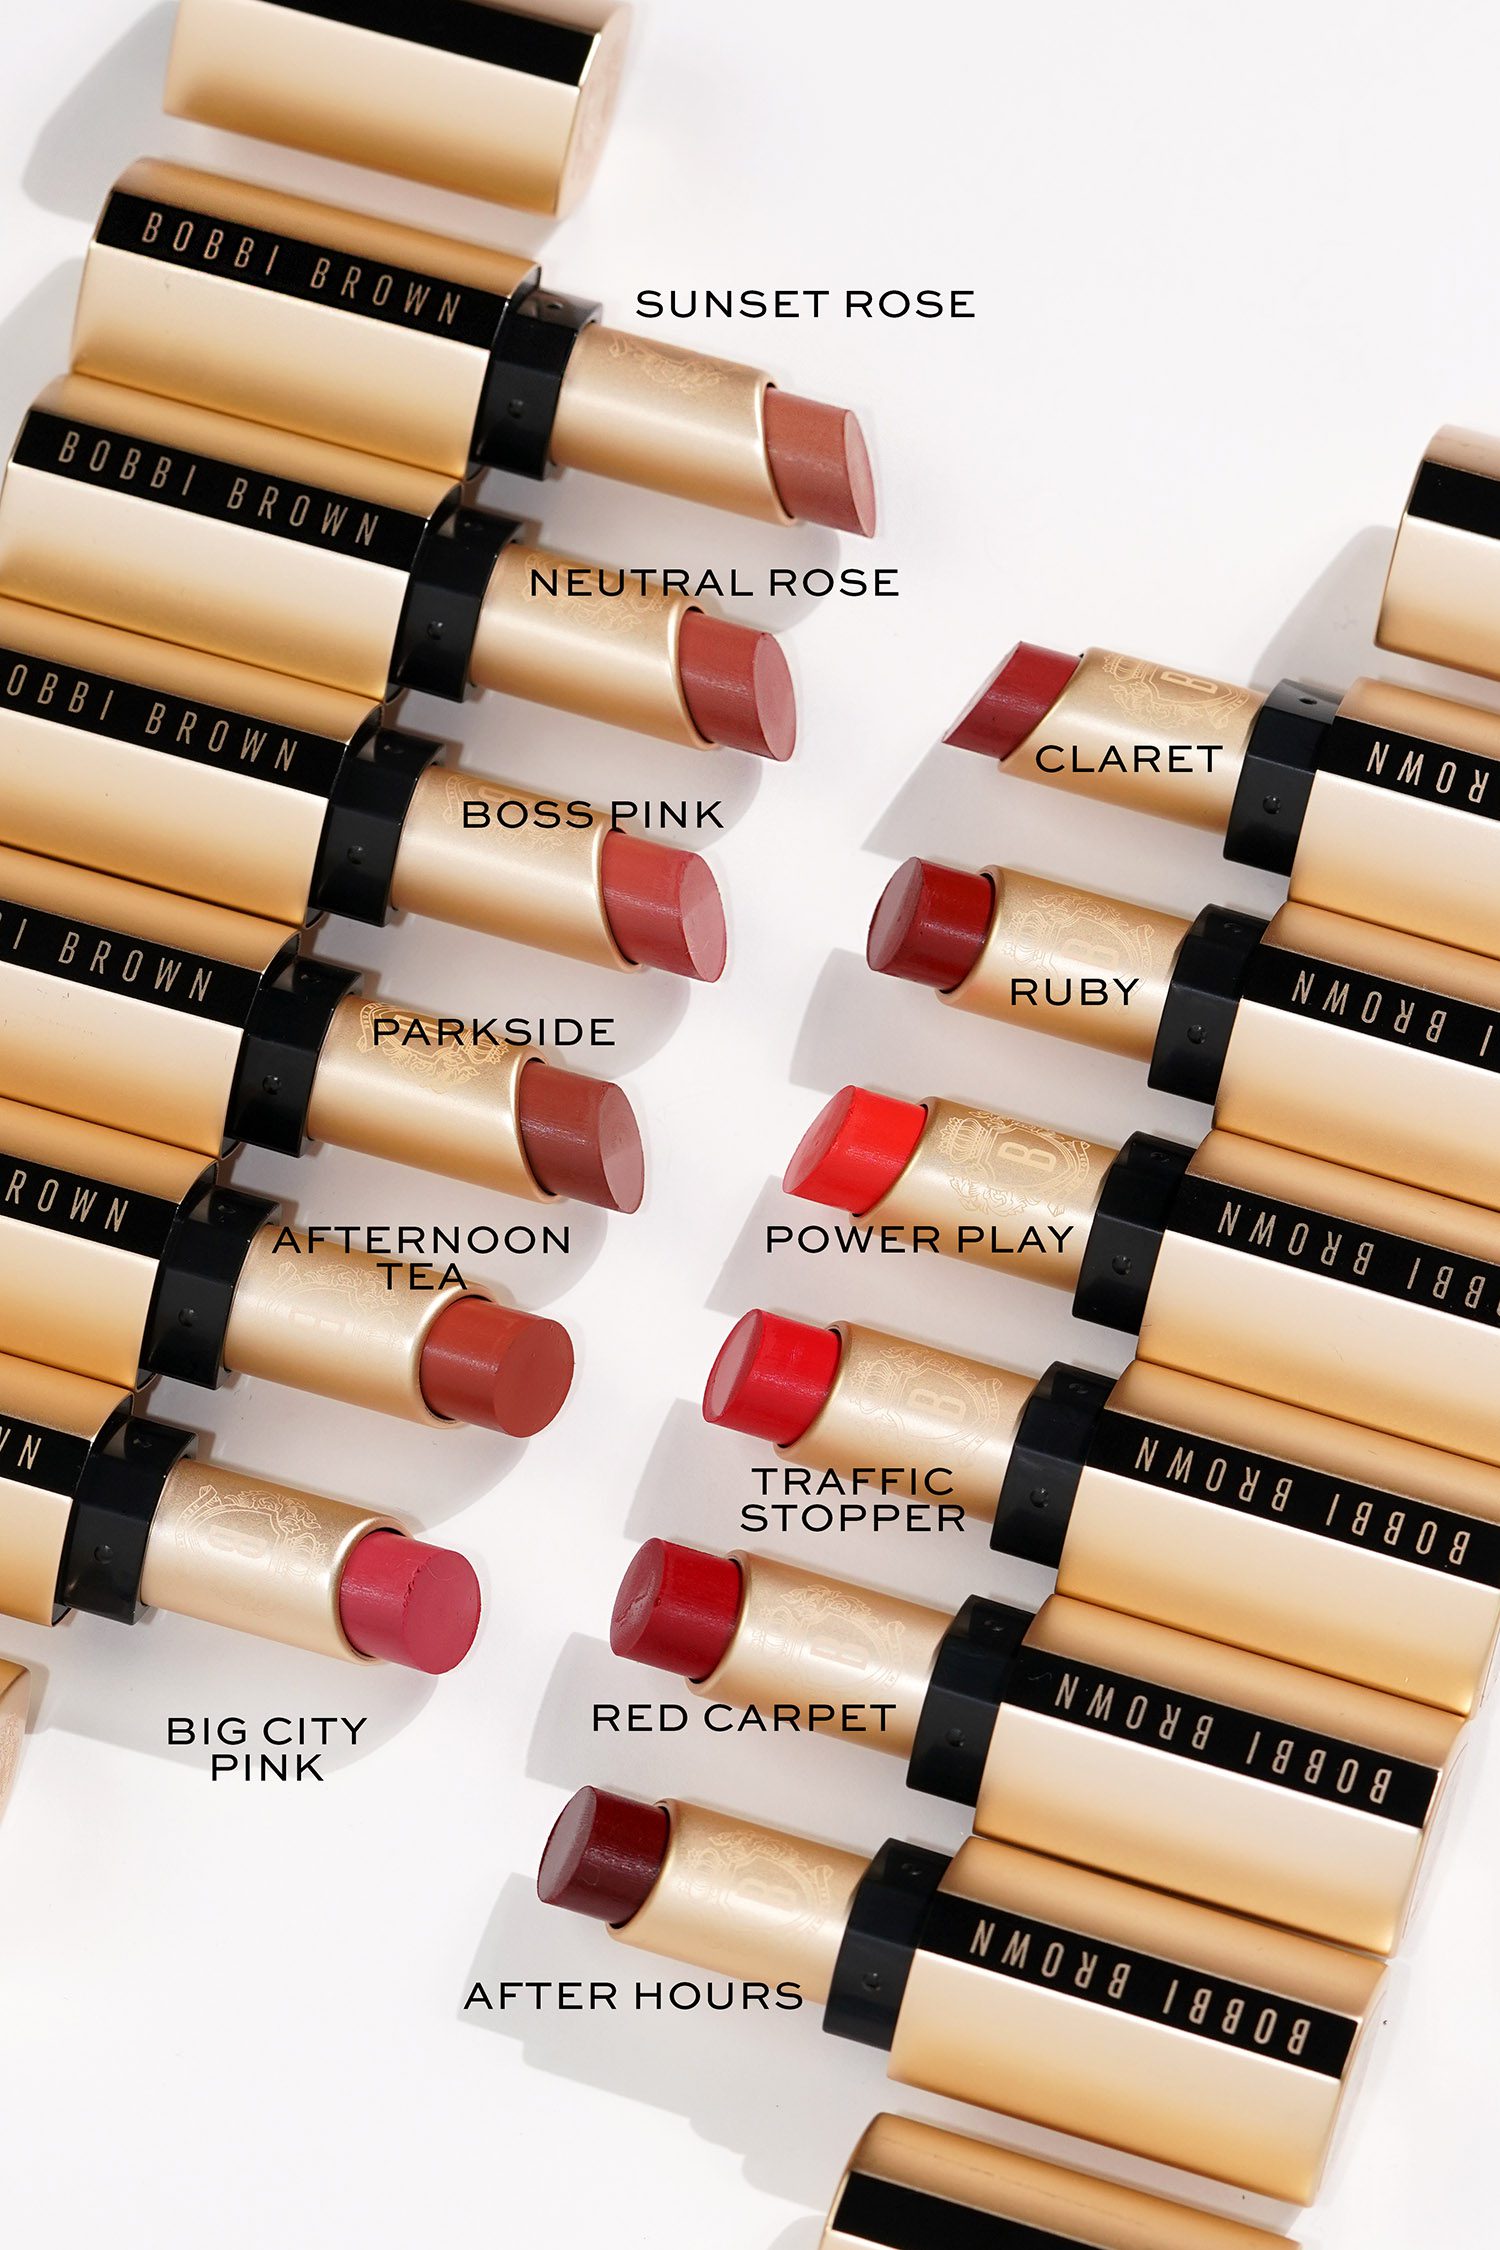 Bobbi Brown Archives - The Beauty Look Book